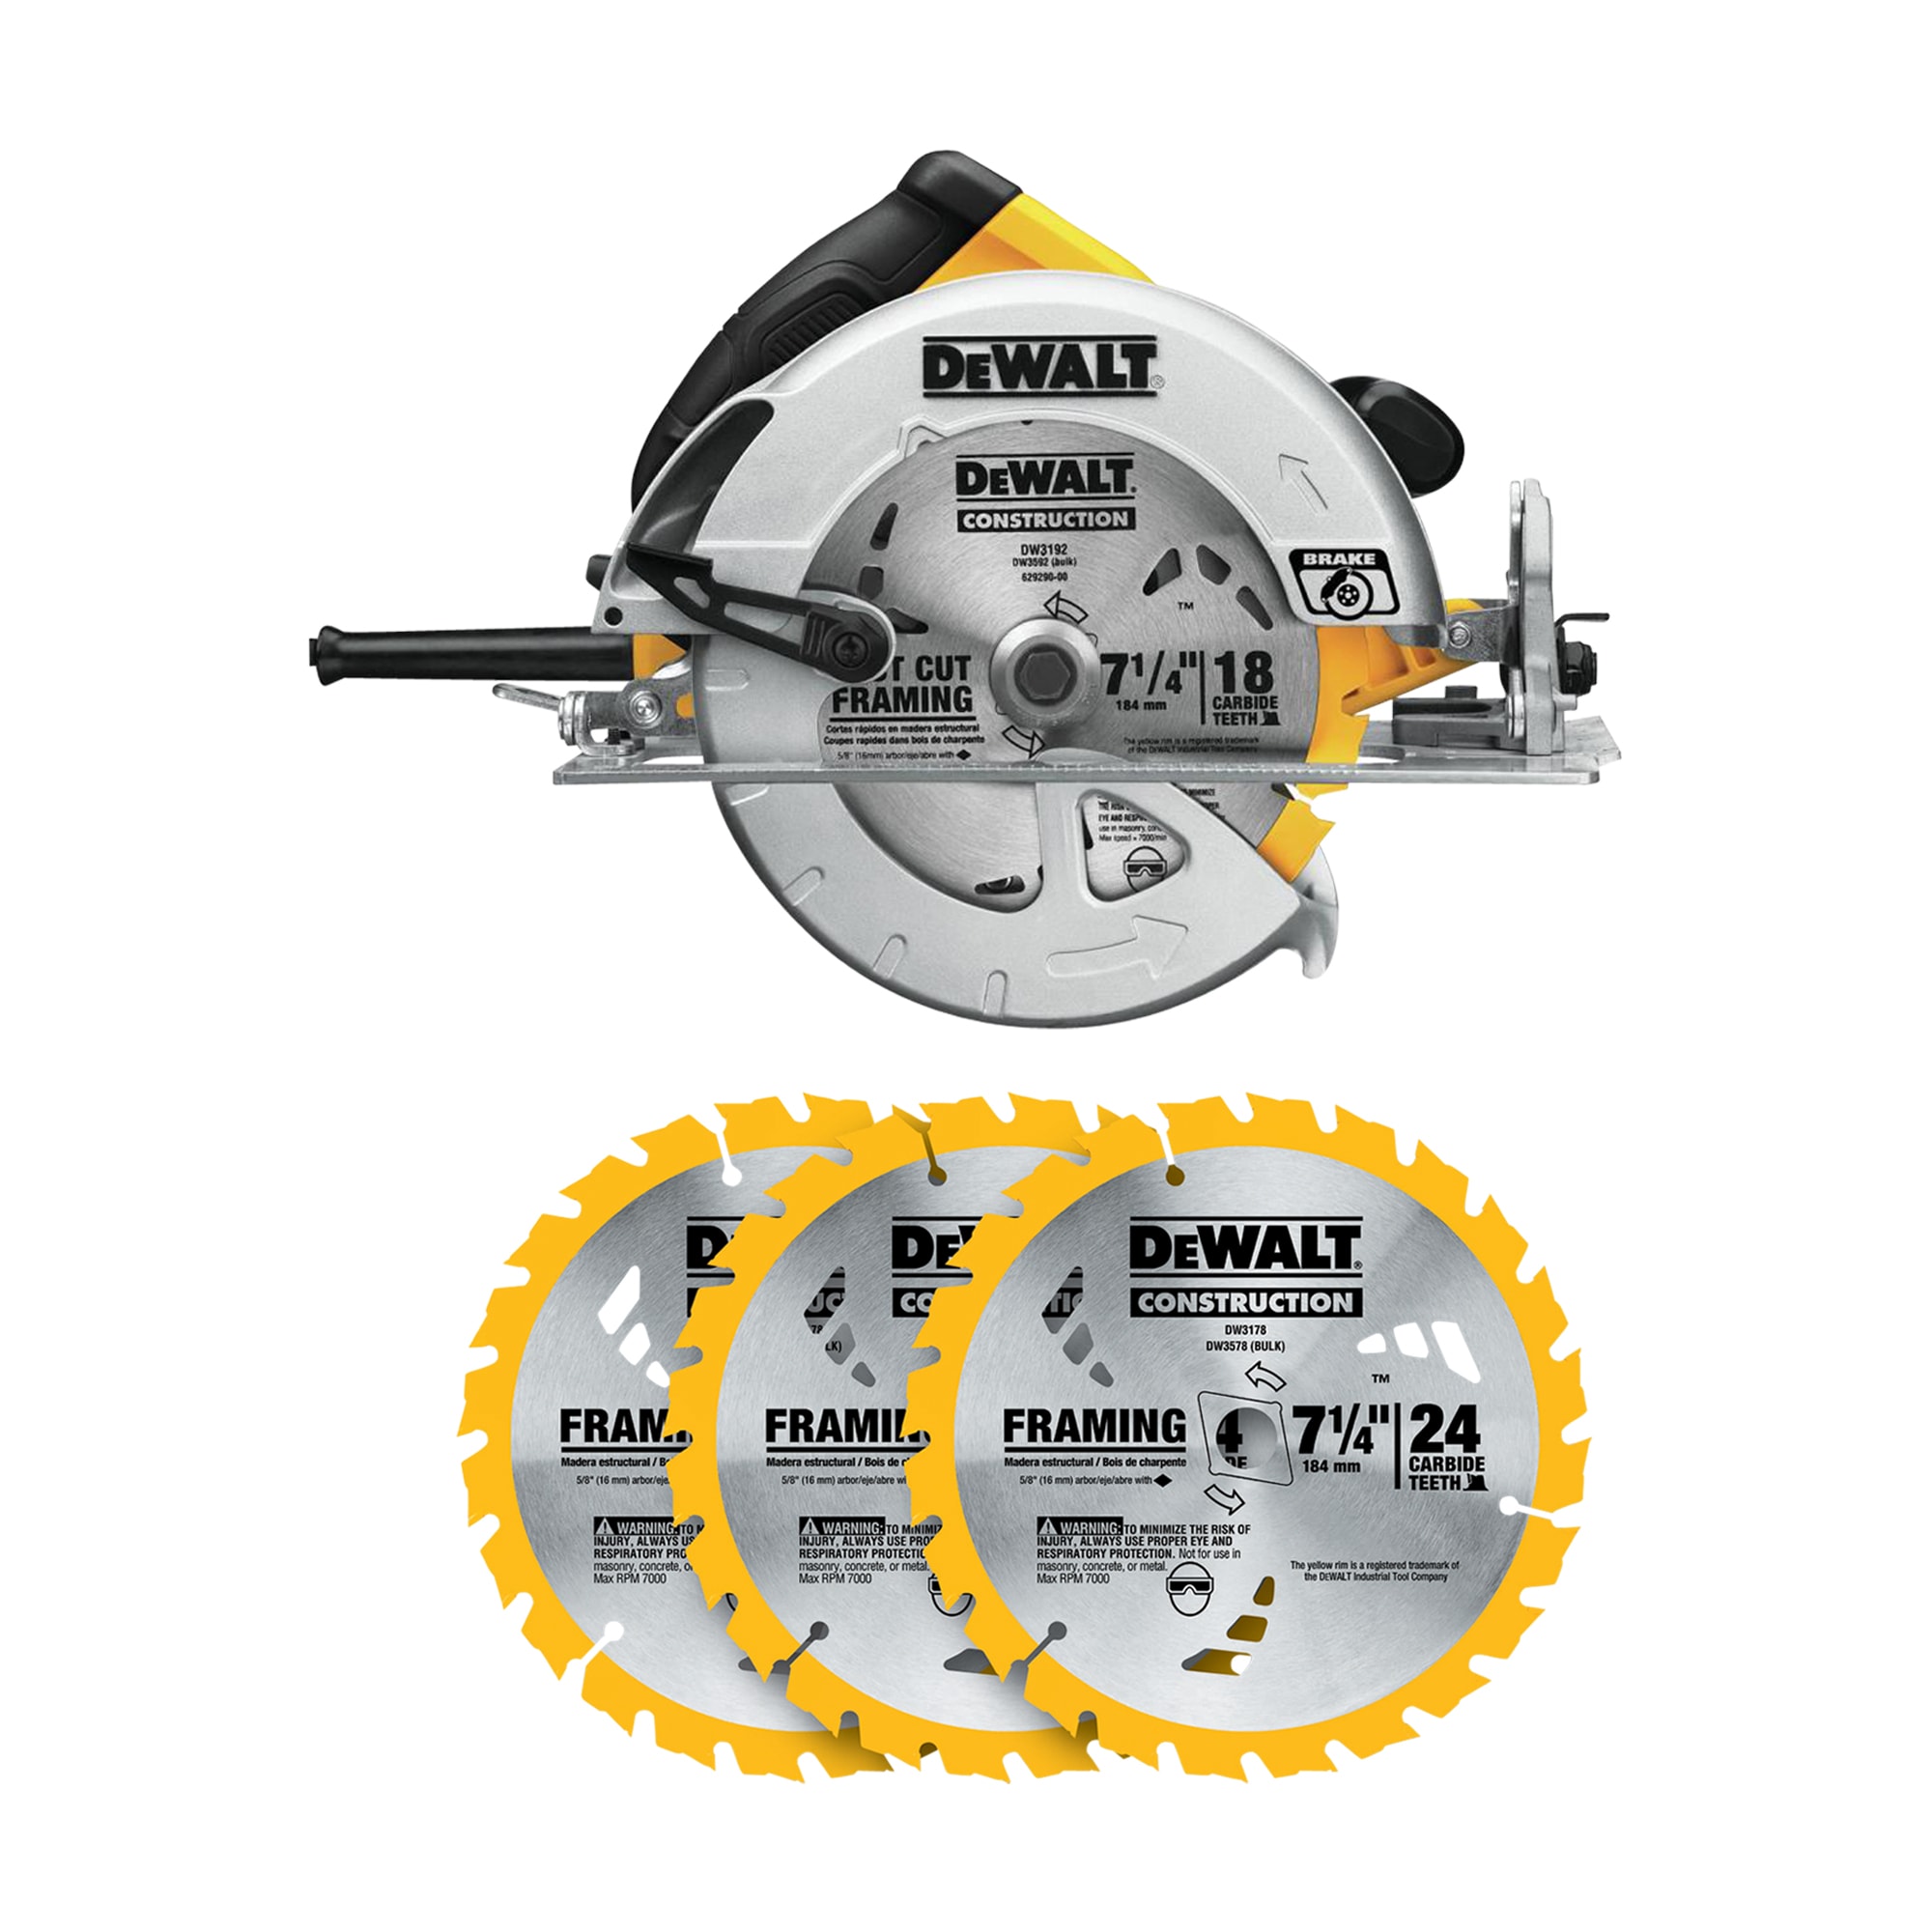 DEWALT 15-Amp 7-1/4-in Corded Circular Saw & Construction 3-Pack 7-1/4-in 24-Tooth Tungsten Carbide-tipped Steel Circular Saw Blade